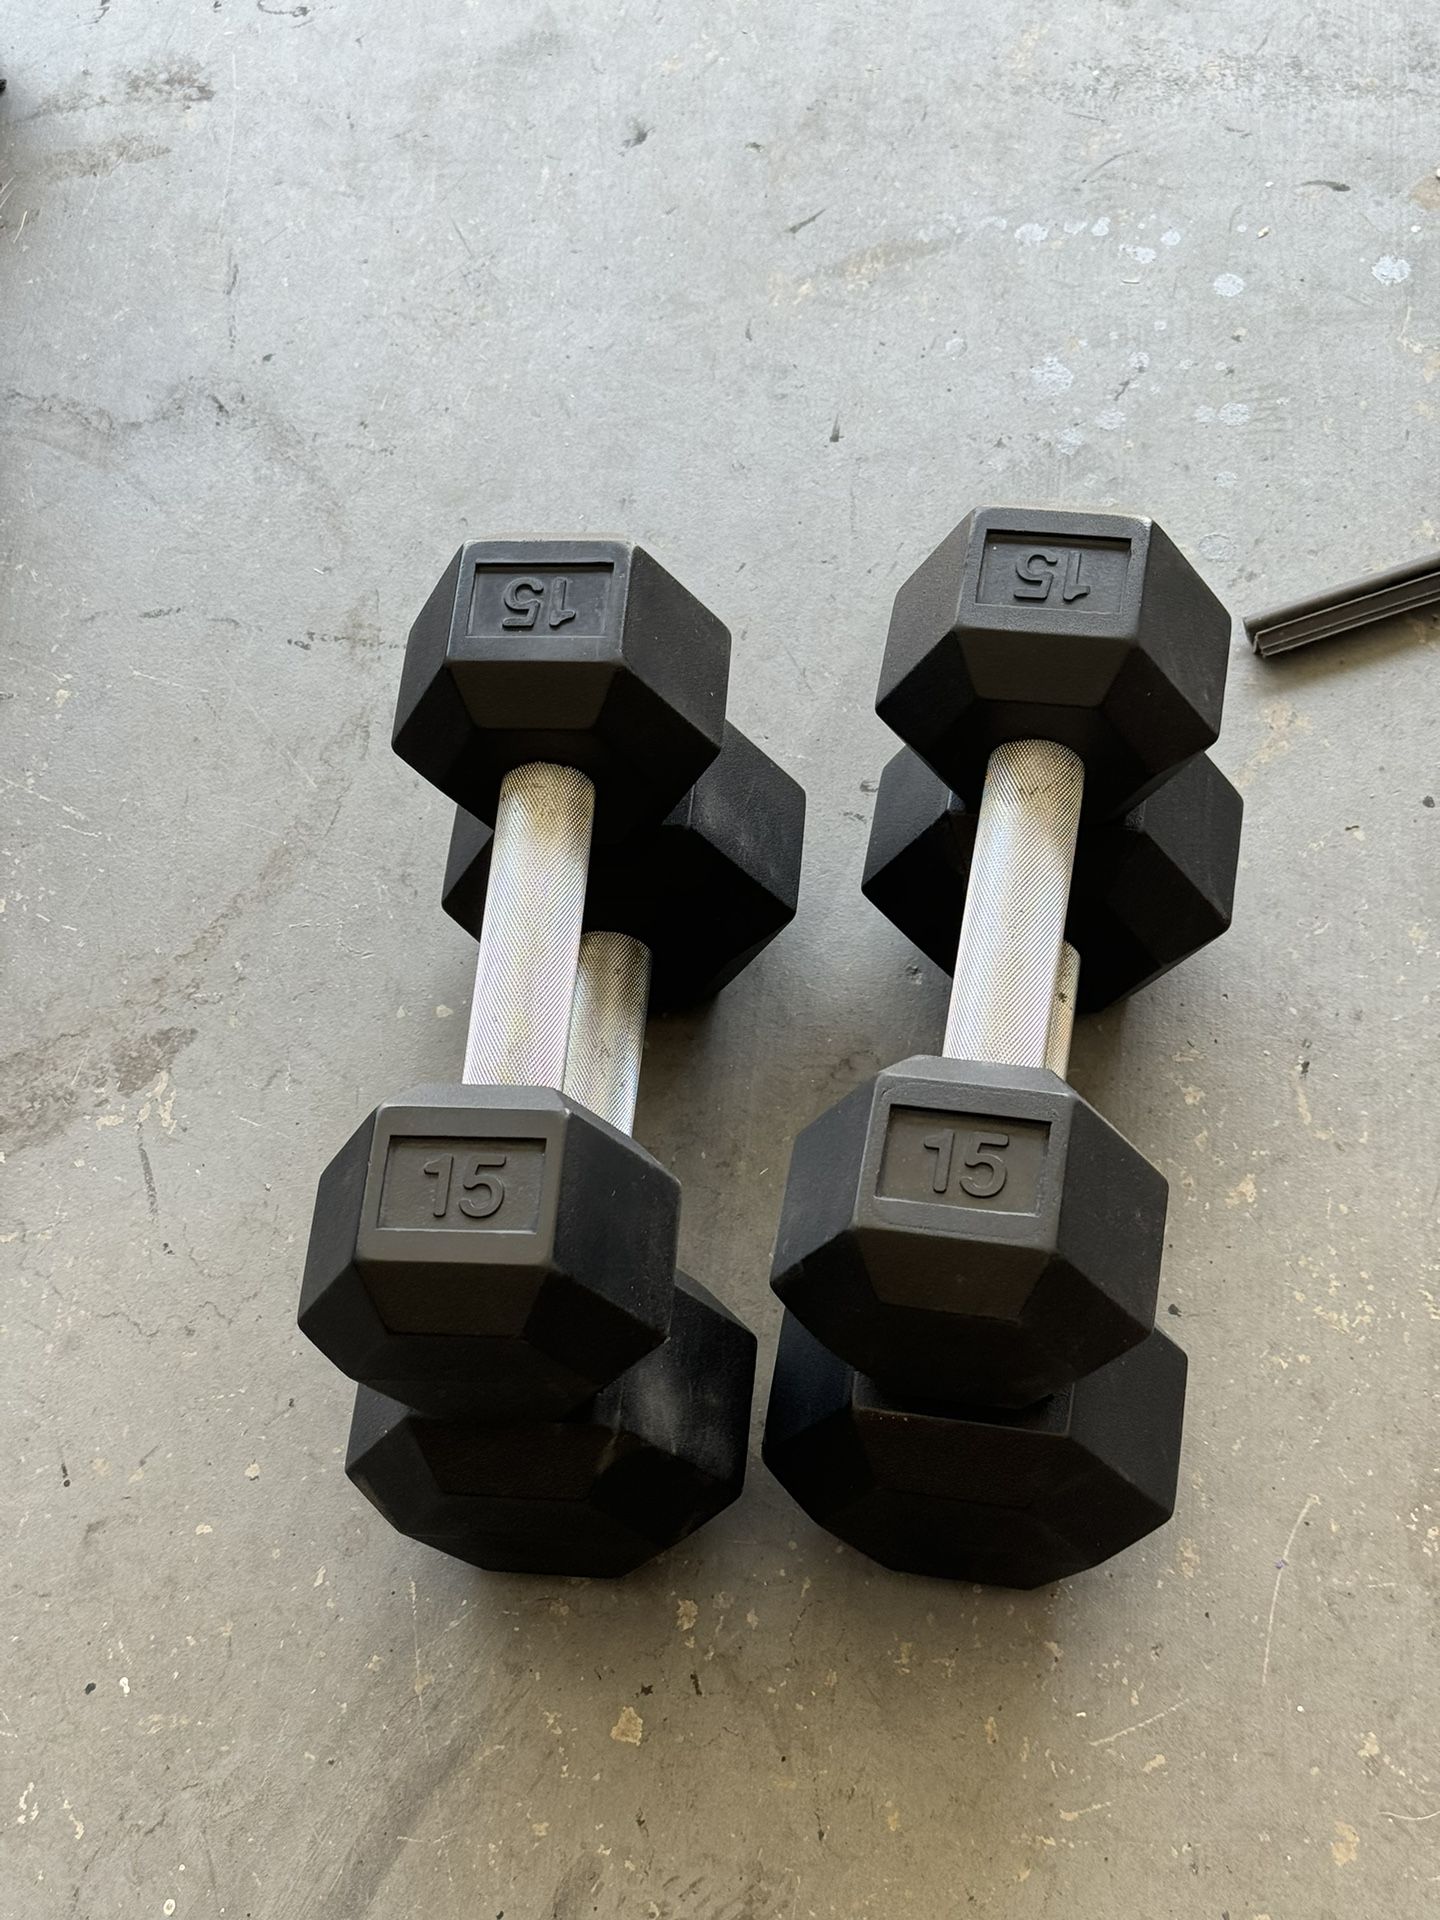 Dumbbells 15s And 25s. 